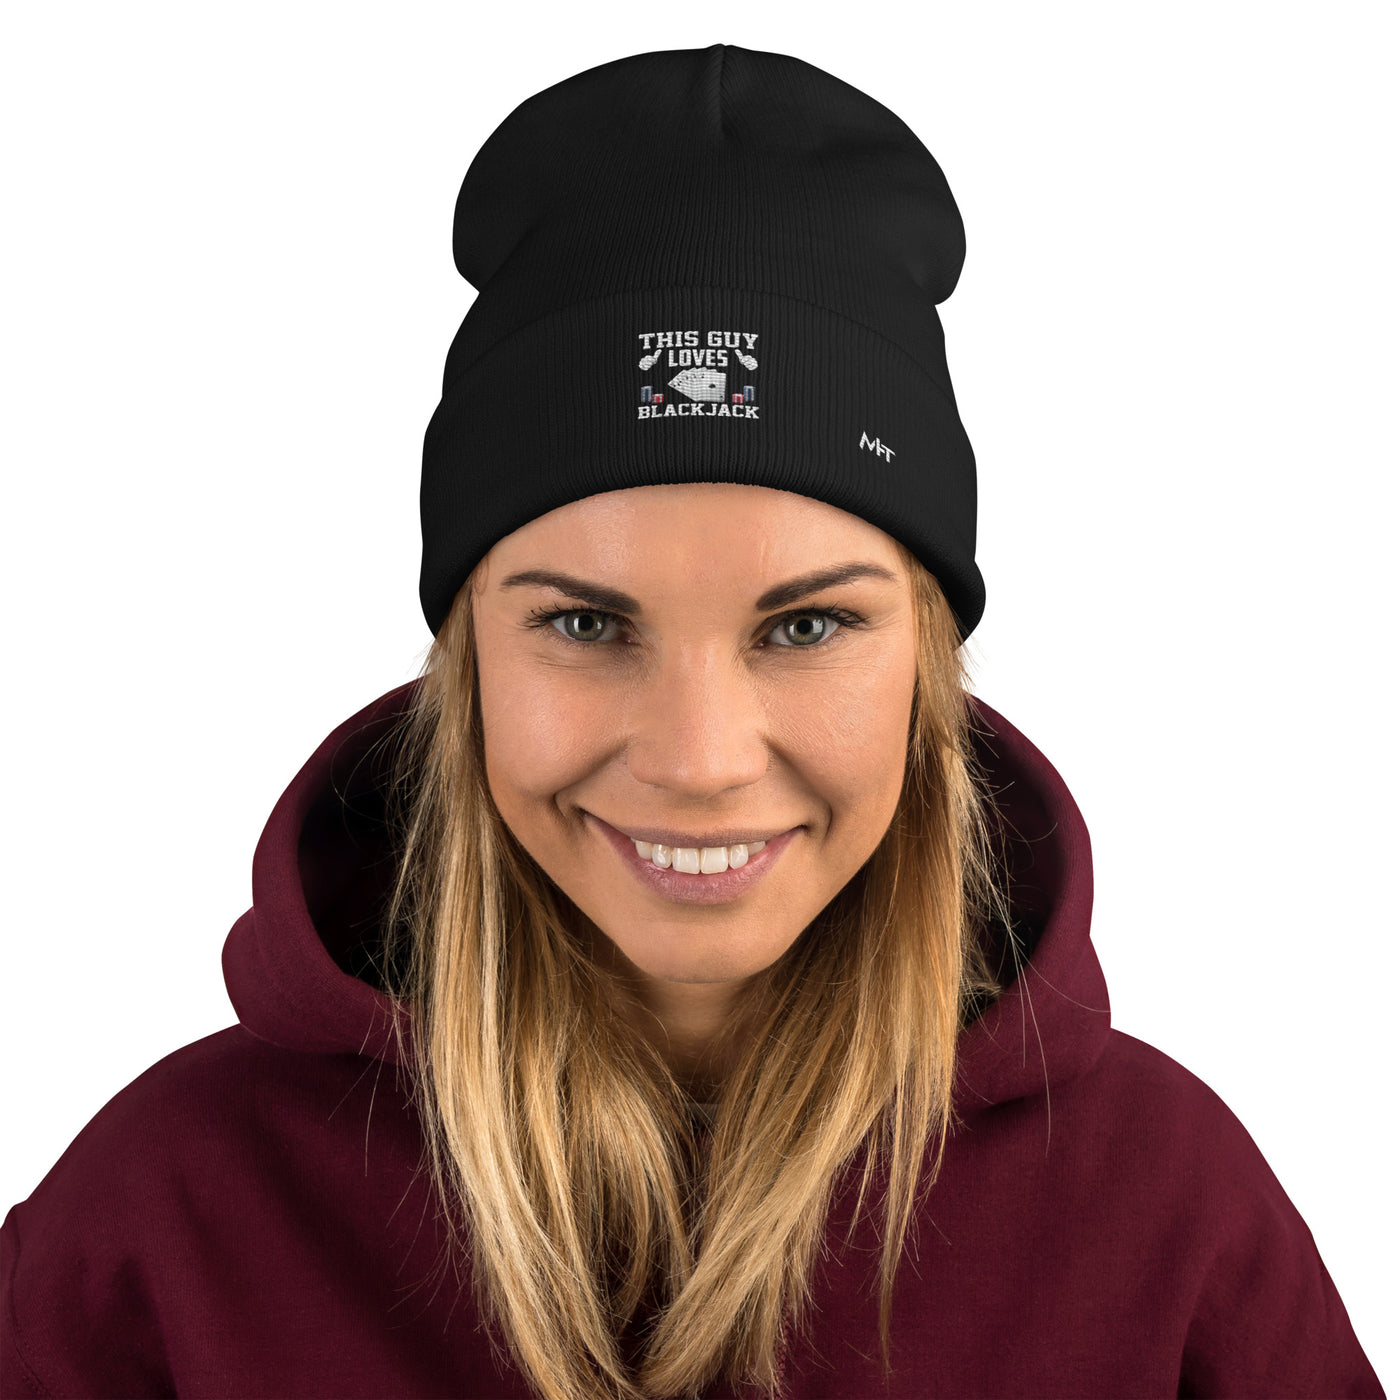 This Guy Loves Black Jack - Embroidered Beanie